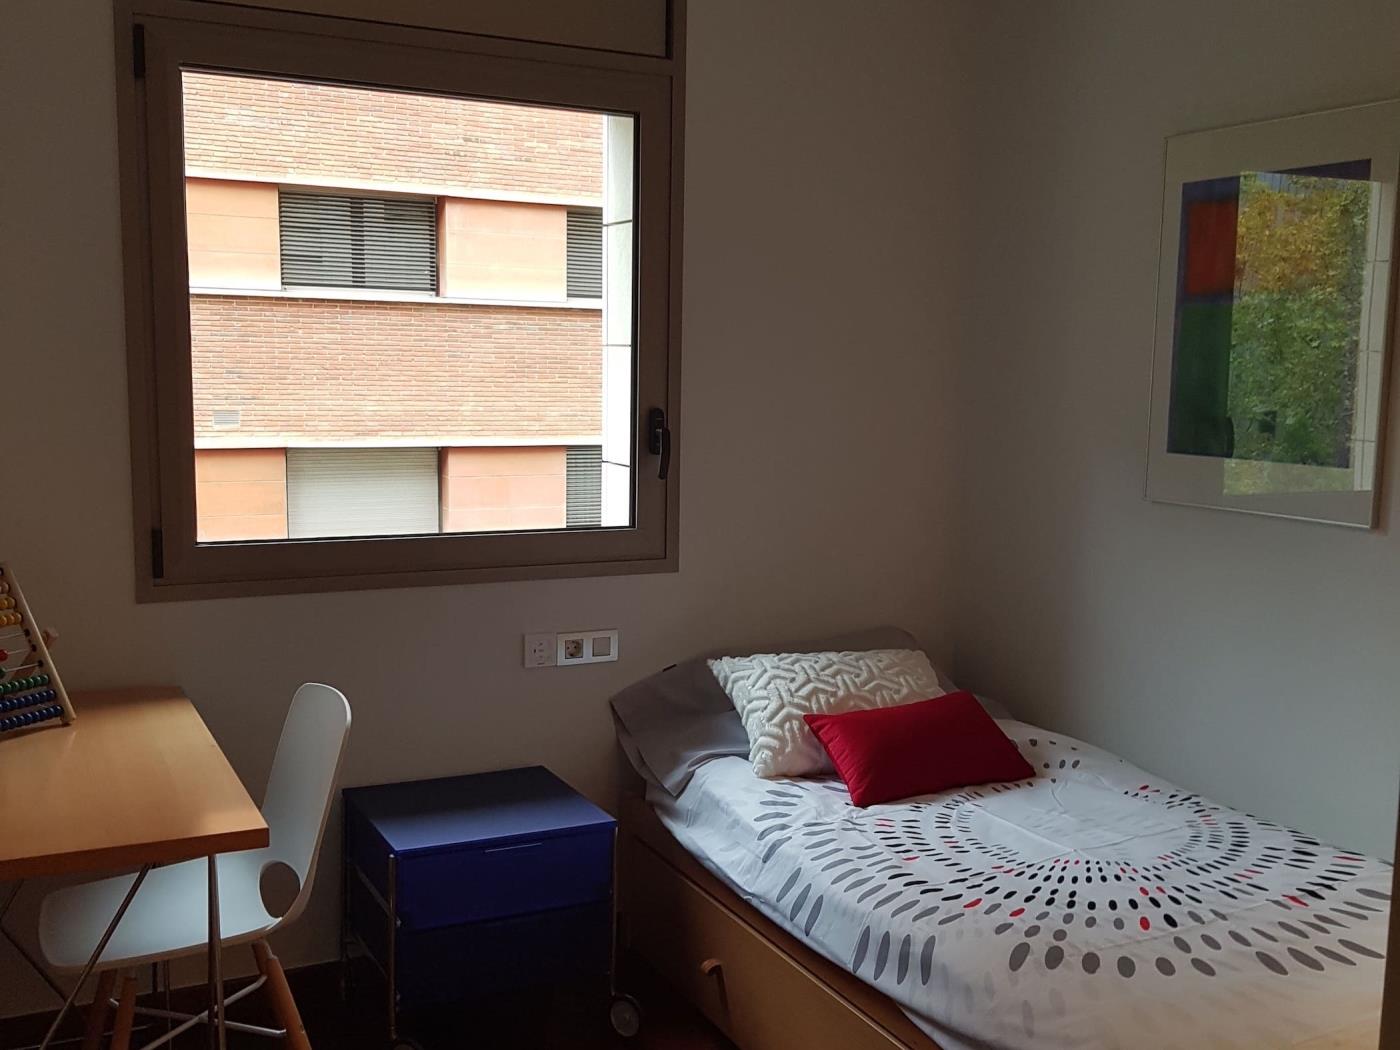 Superb 2 Bedroom apartment & 2 bathroom in Sant Gervasi for Monthly Rental - My Space Barcelona Apartments